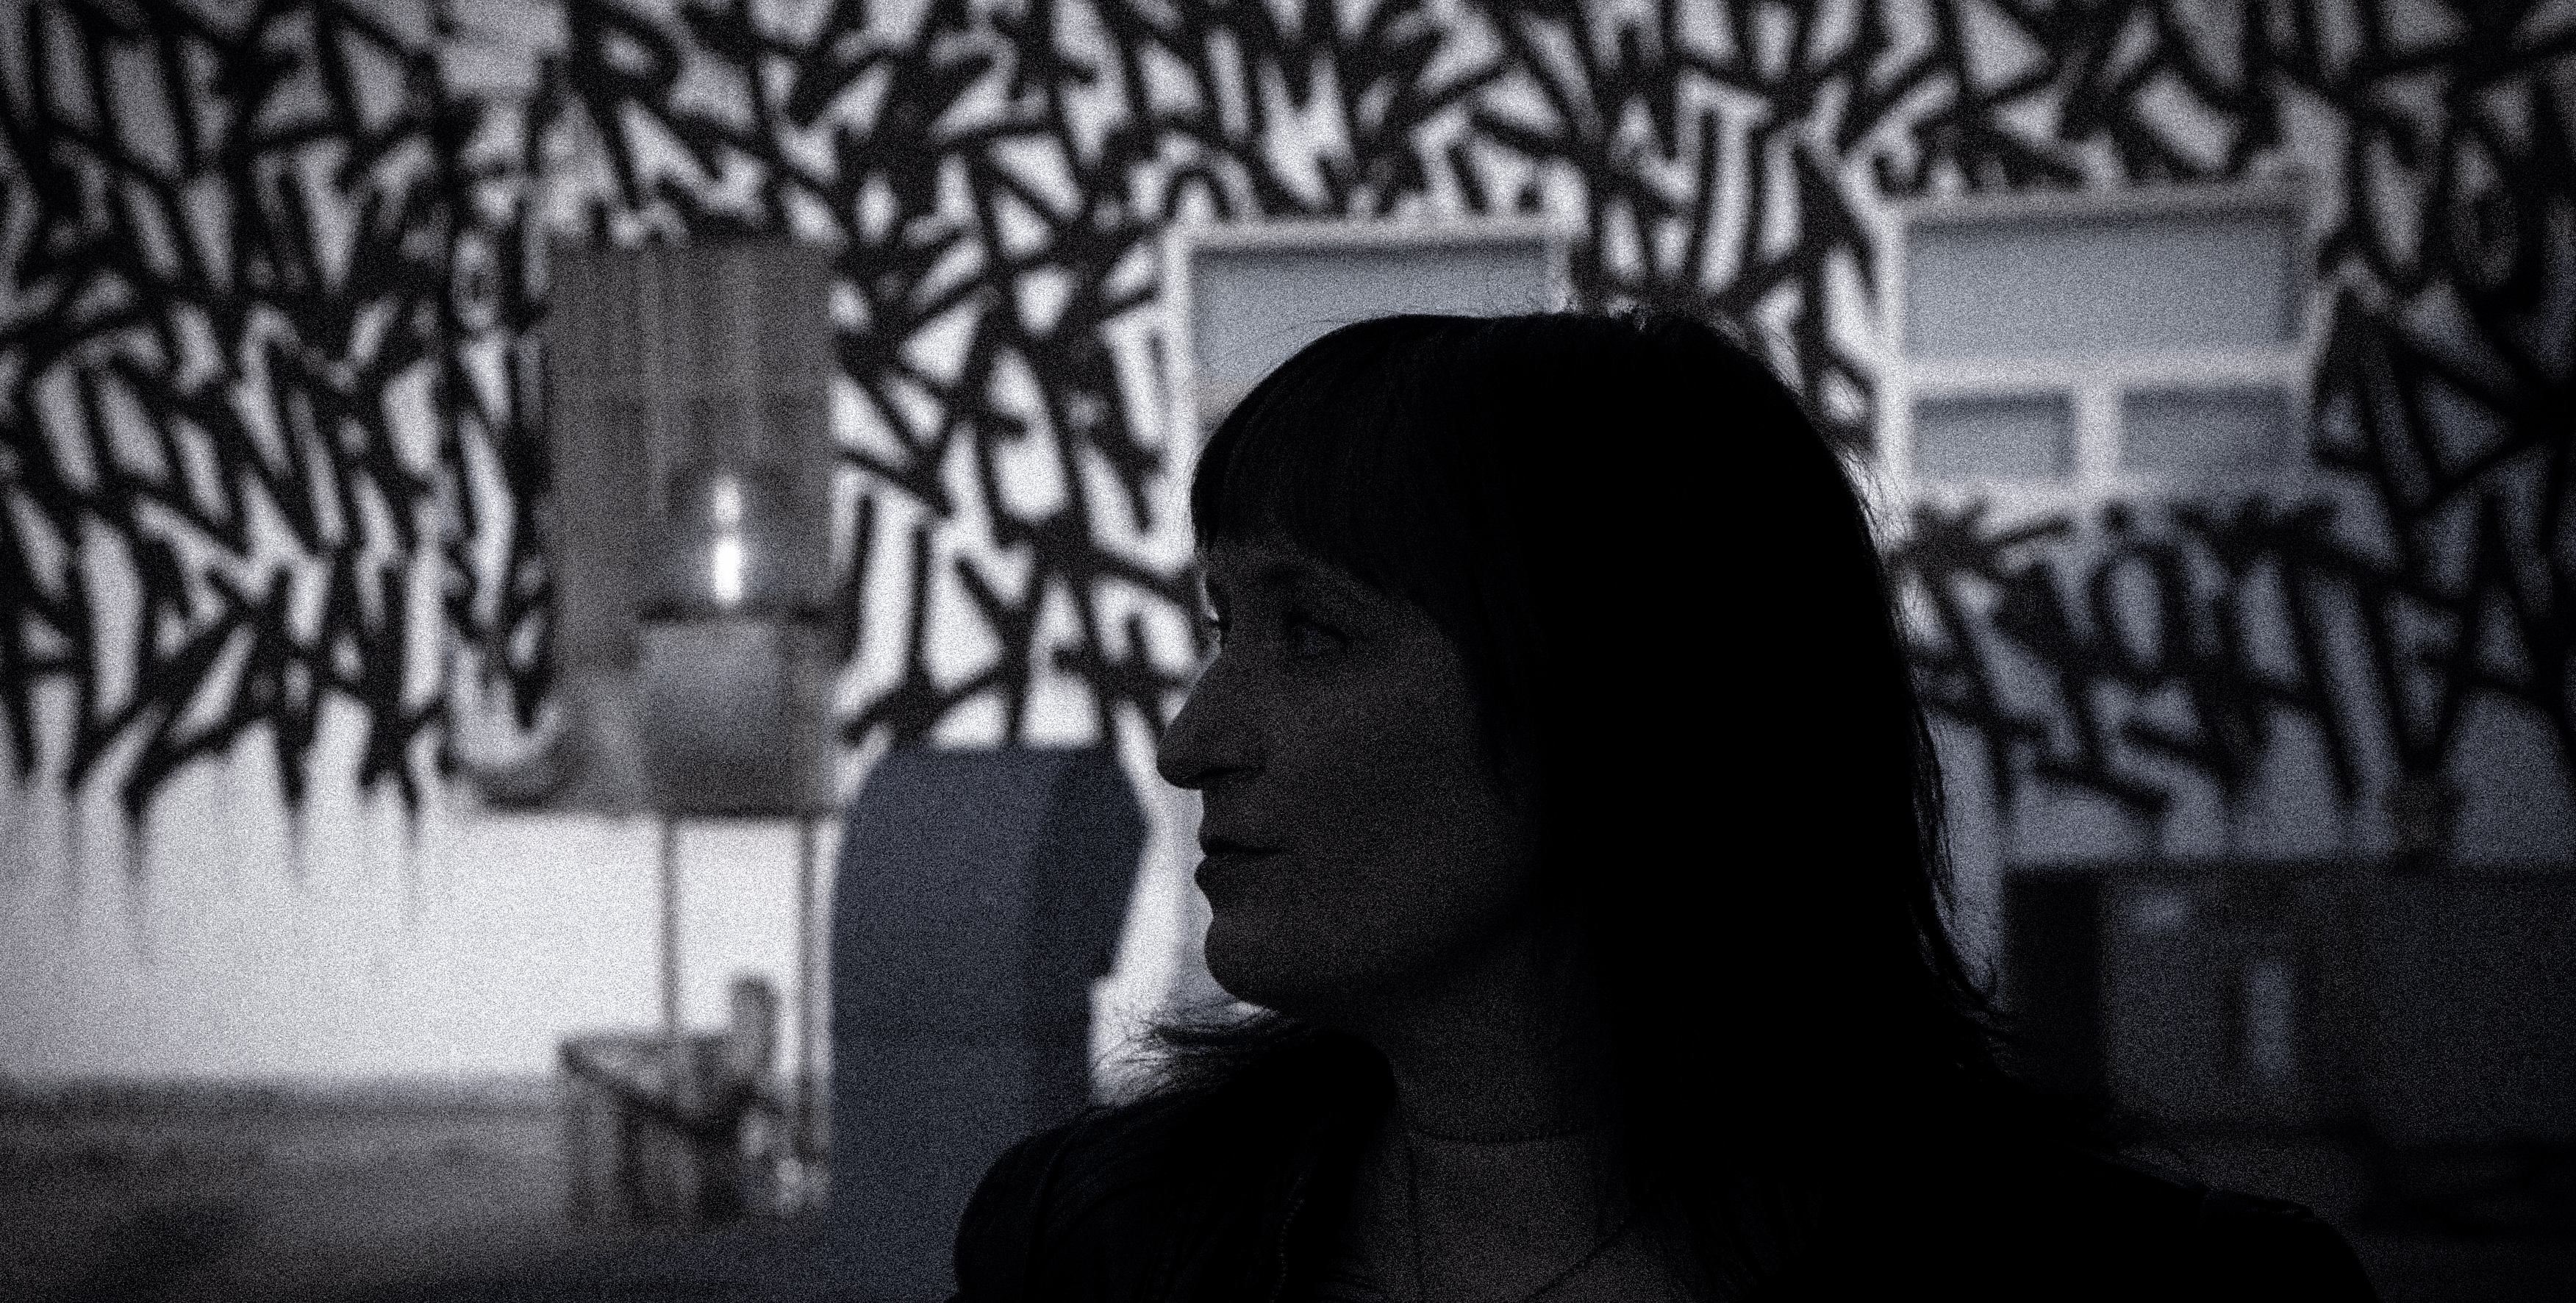 black and white silhouette of author in from of high contrast graffitied warehouse